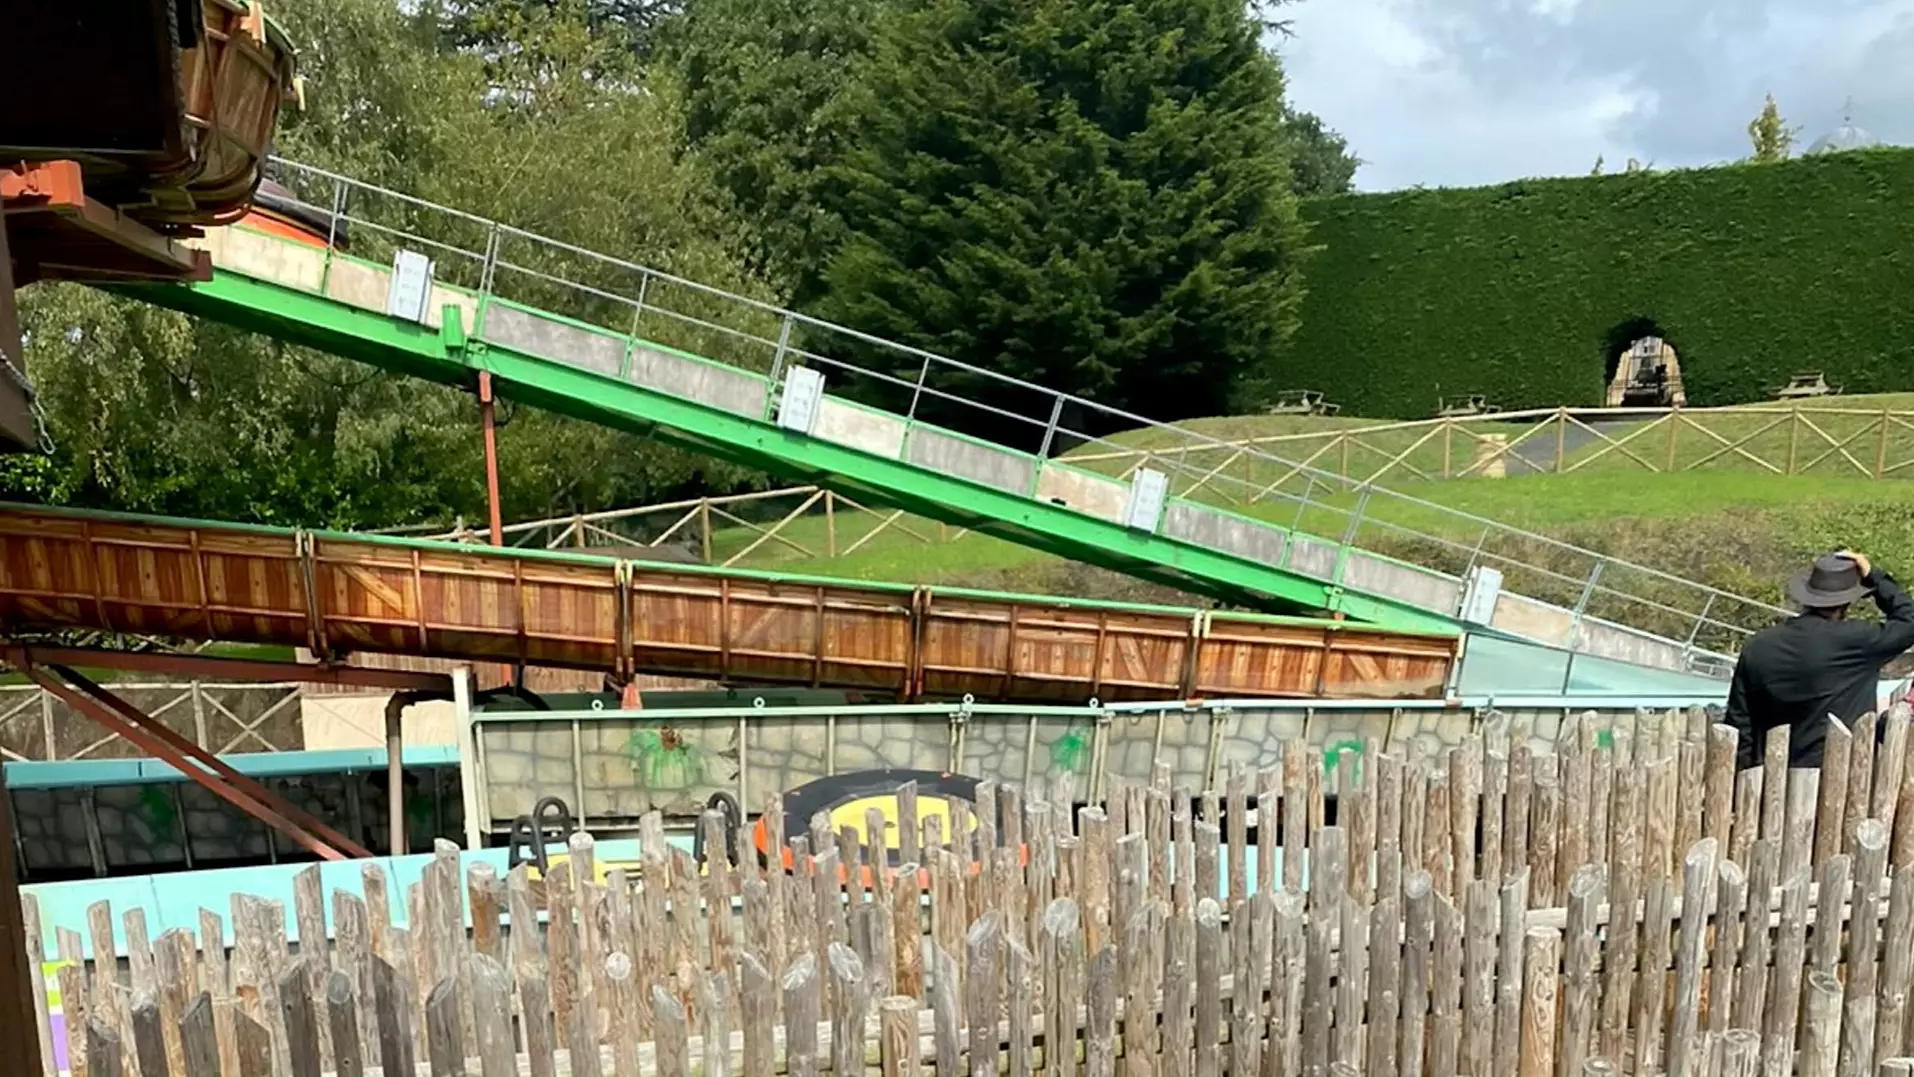 Emergency Services Called After Family Capsize On Theme Park Ride 